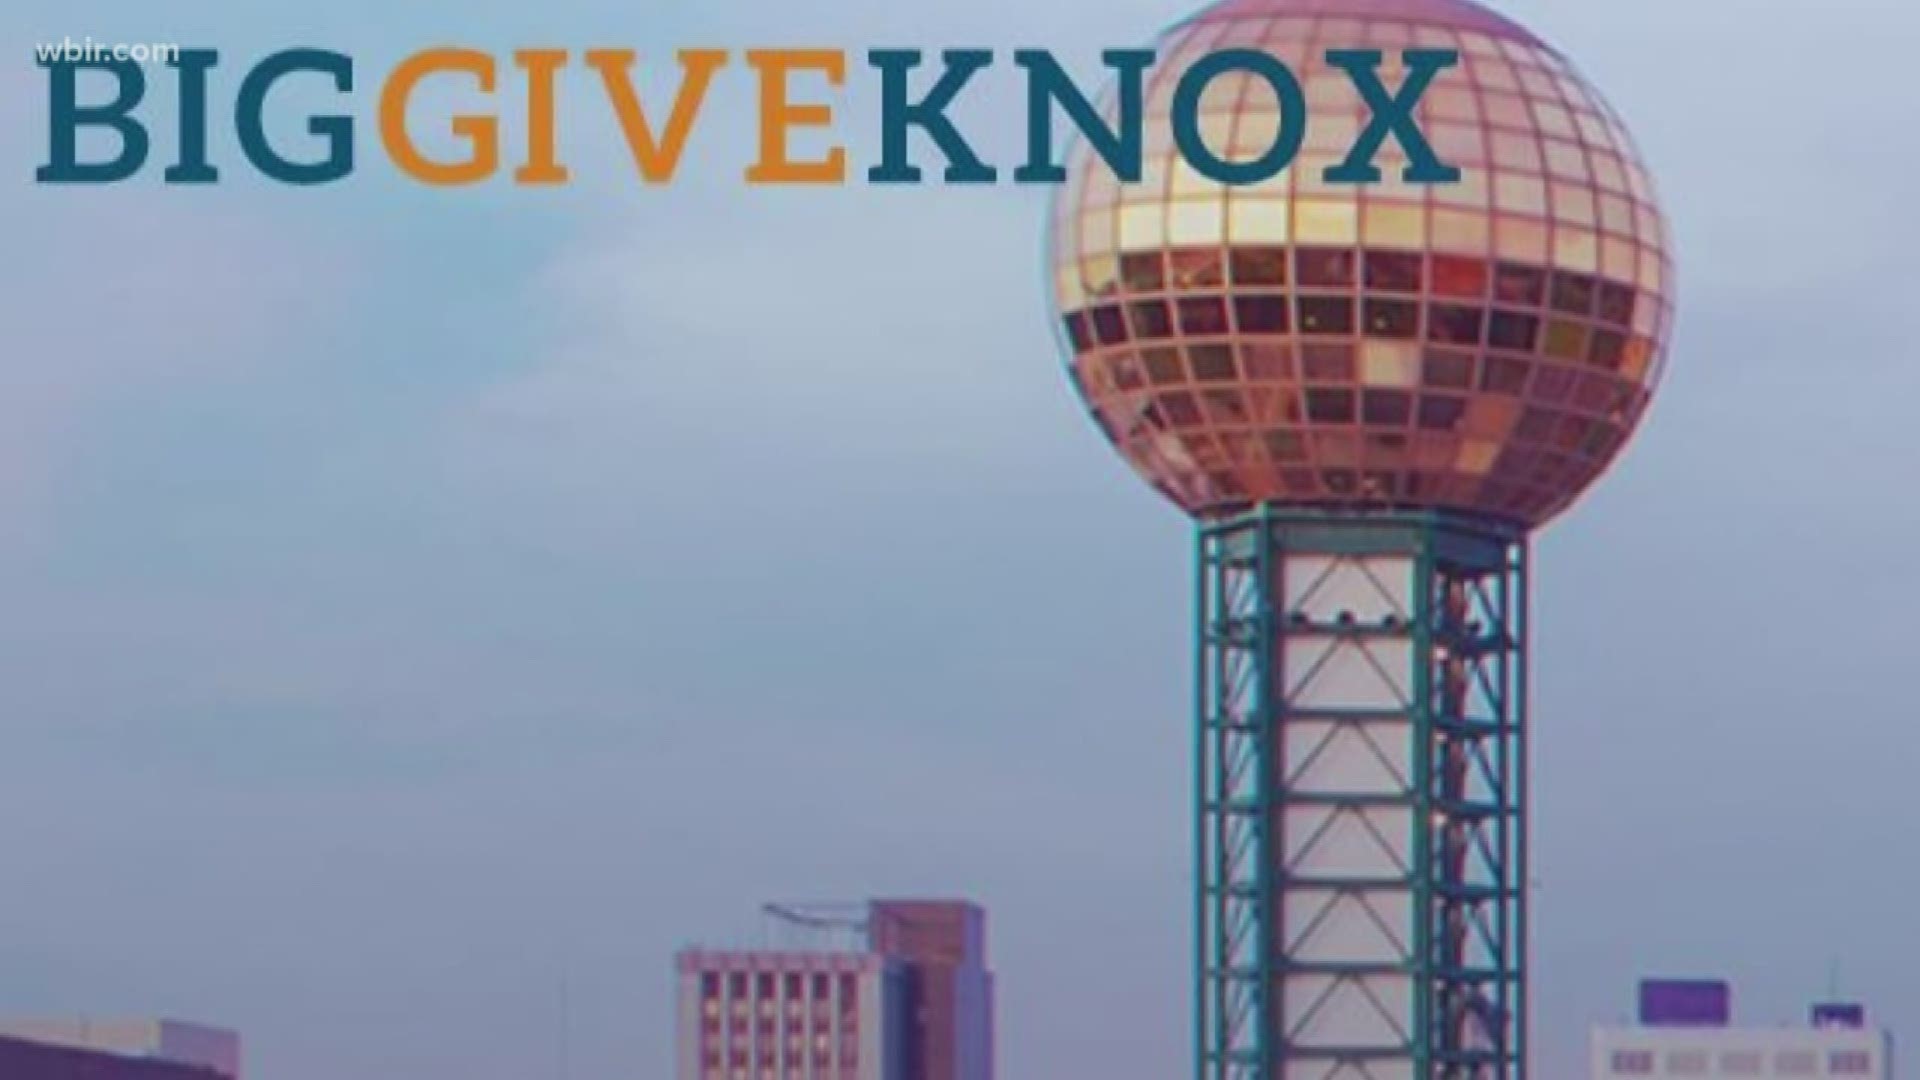 More than 100 Knoxville charities are coming together for 'Big Give Knox' on Giving Tuesday 2019.